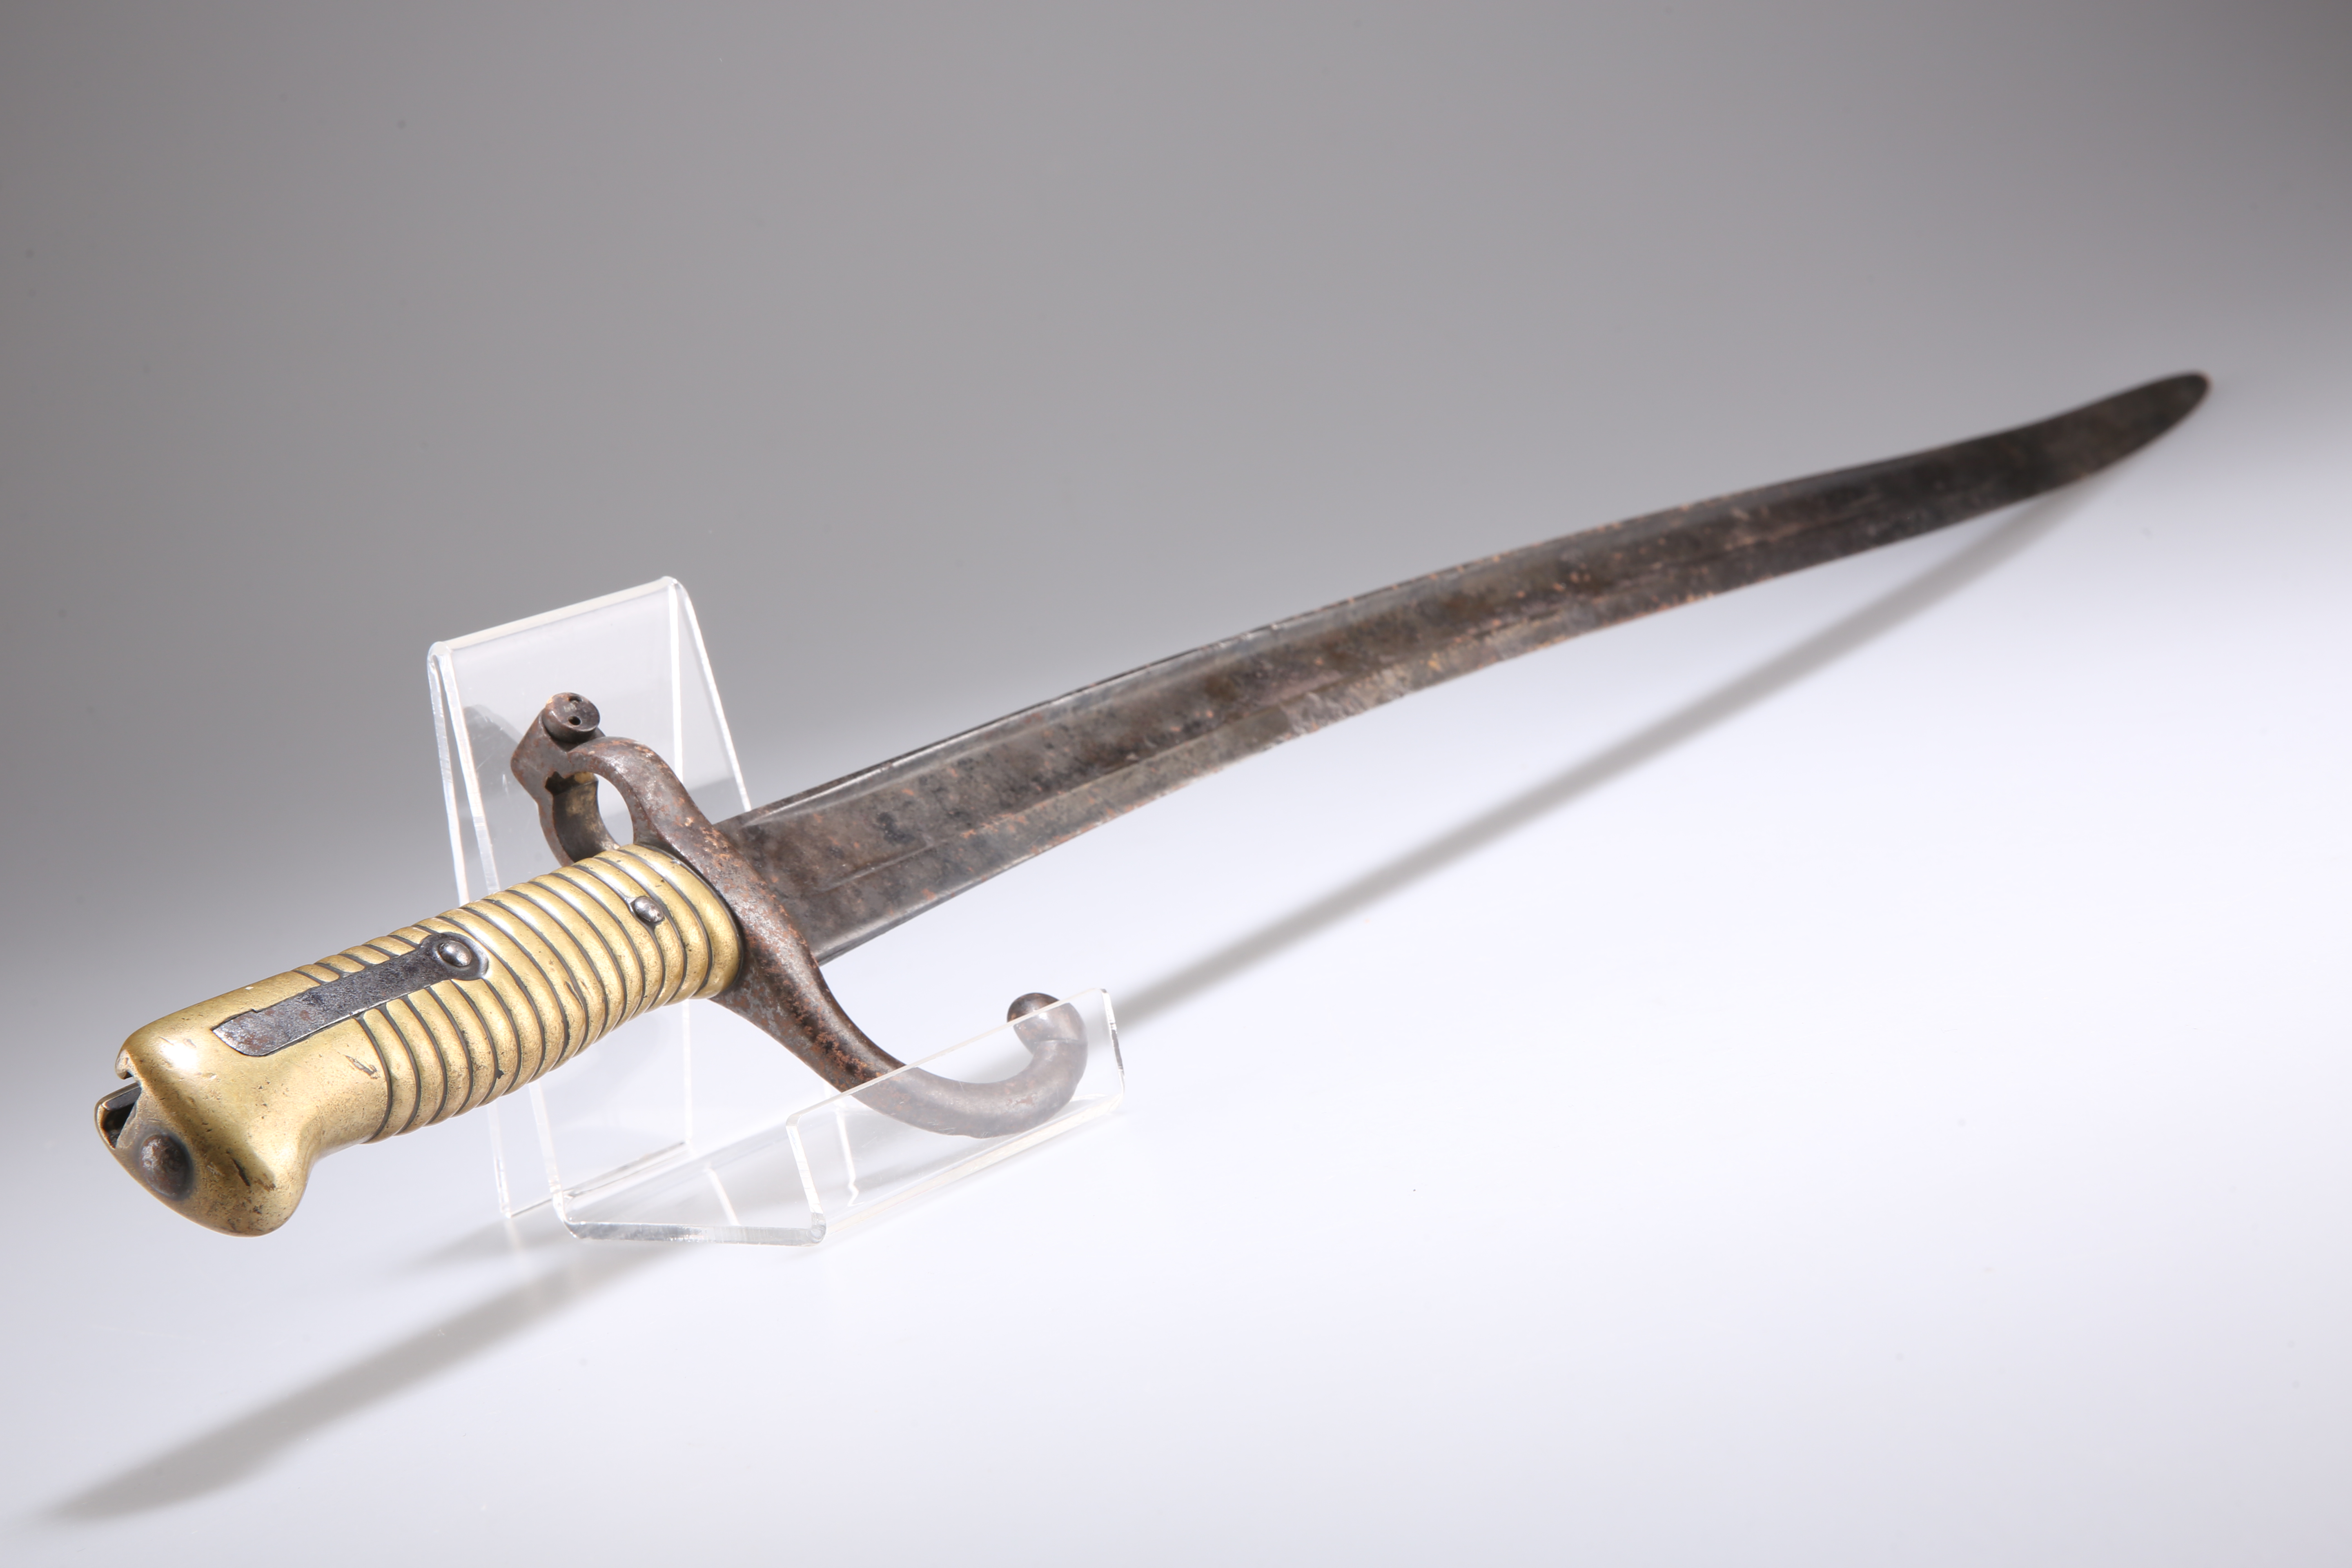 A FRENCH 19TH CENTURY INFANTRY BAYONET